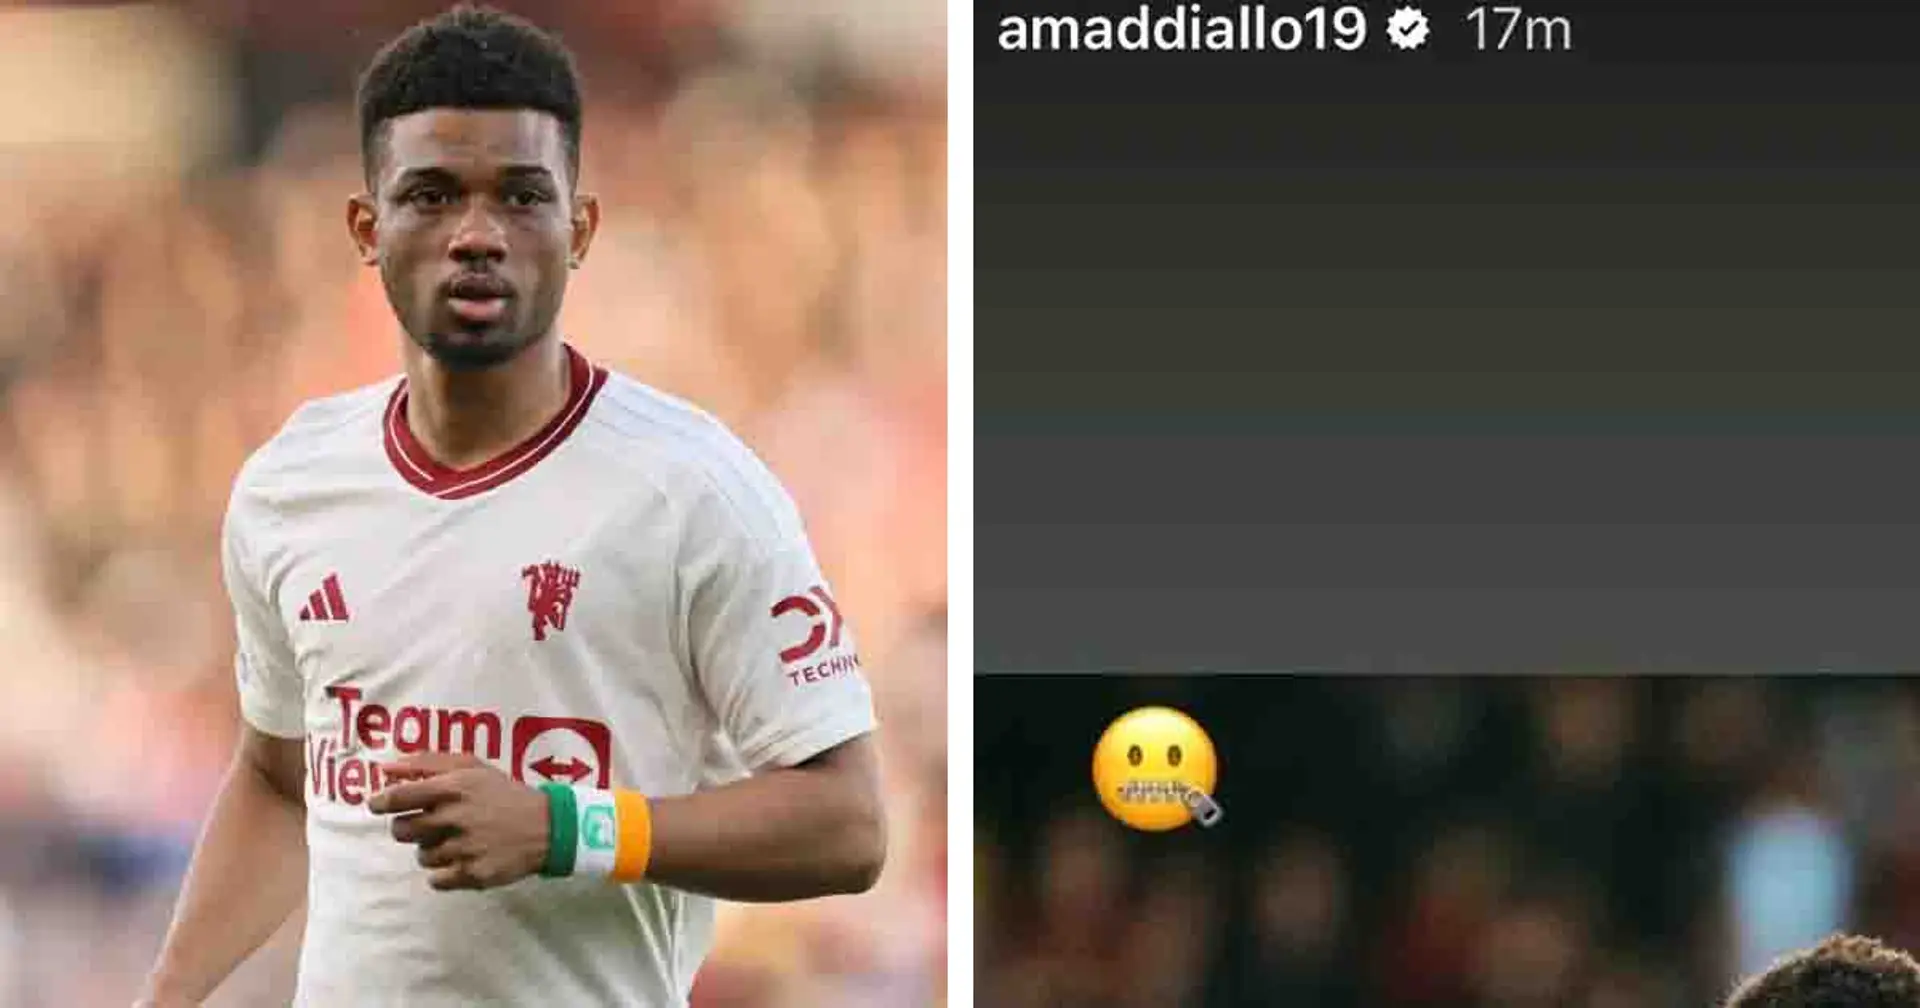 'This is why I can't be Ten Hag out': Man United fans slam Amad Diallo's cryptic Instagram post after Bournemouth draw